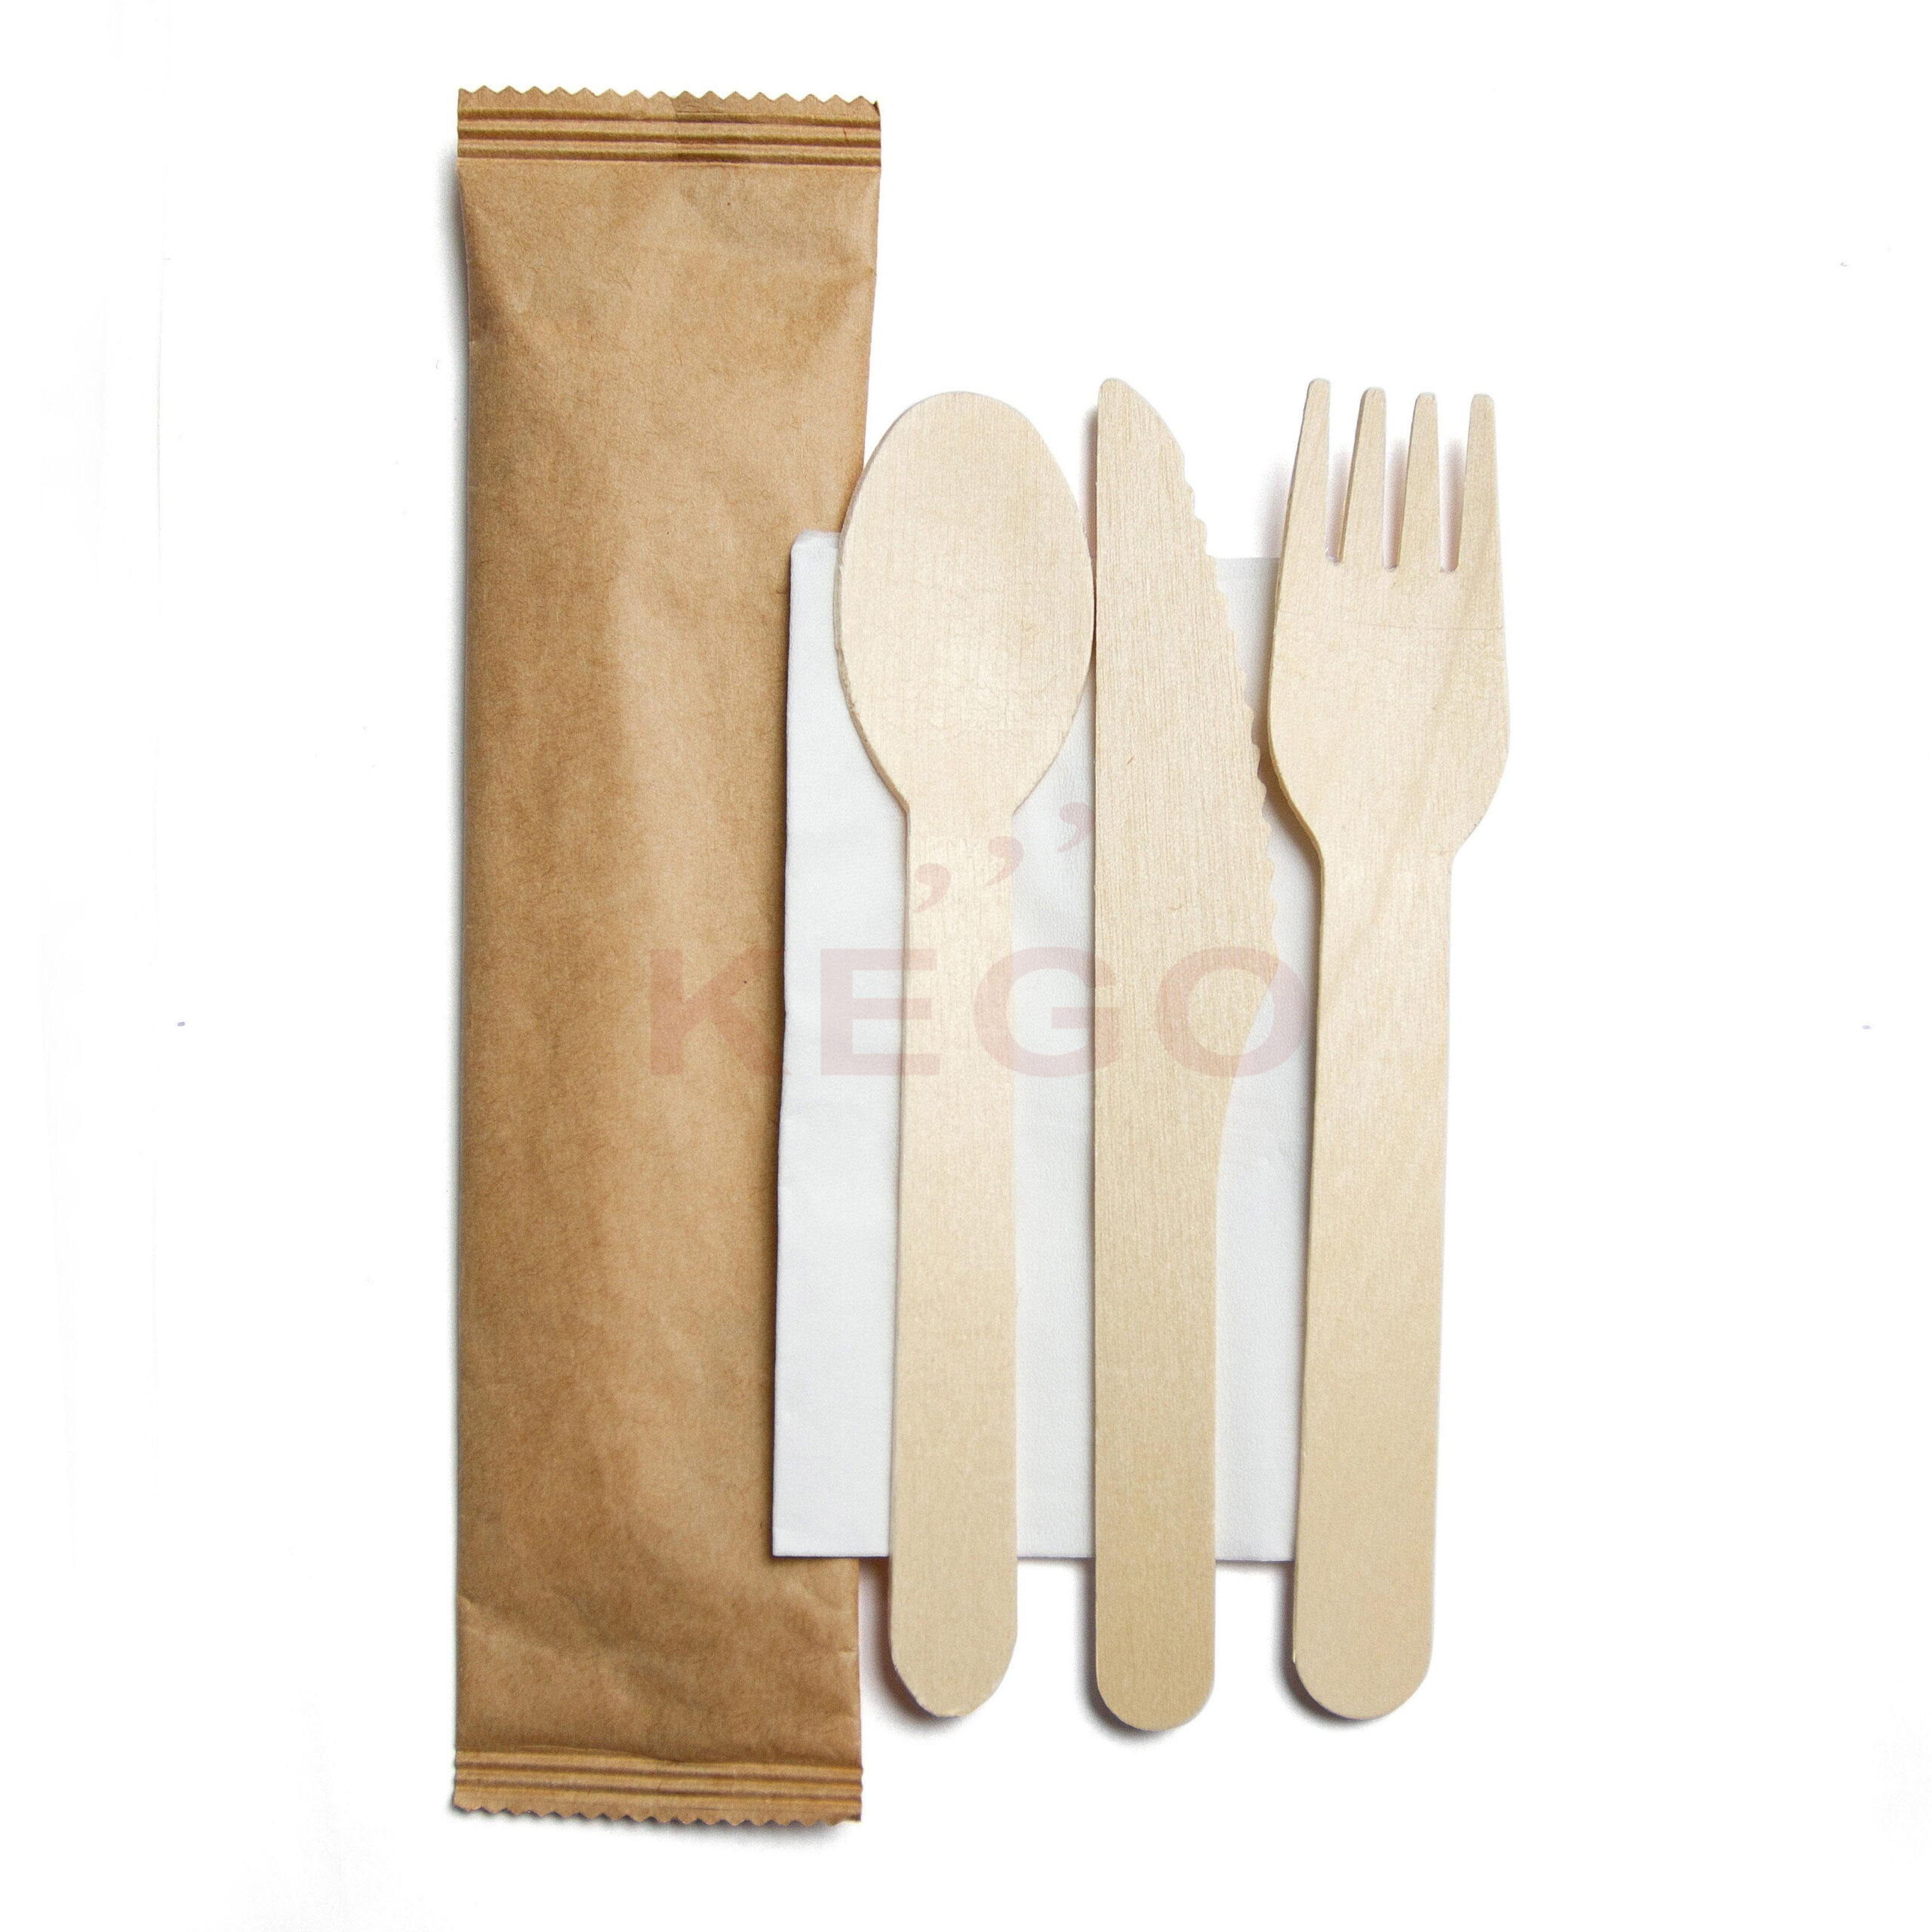 https://disposablewoodencutlery.com/wp-content/uploads/2015/09/Mix-Set-With-Napkin-1-1-scaled.jpg